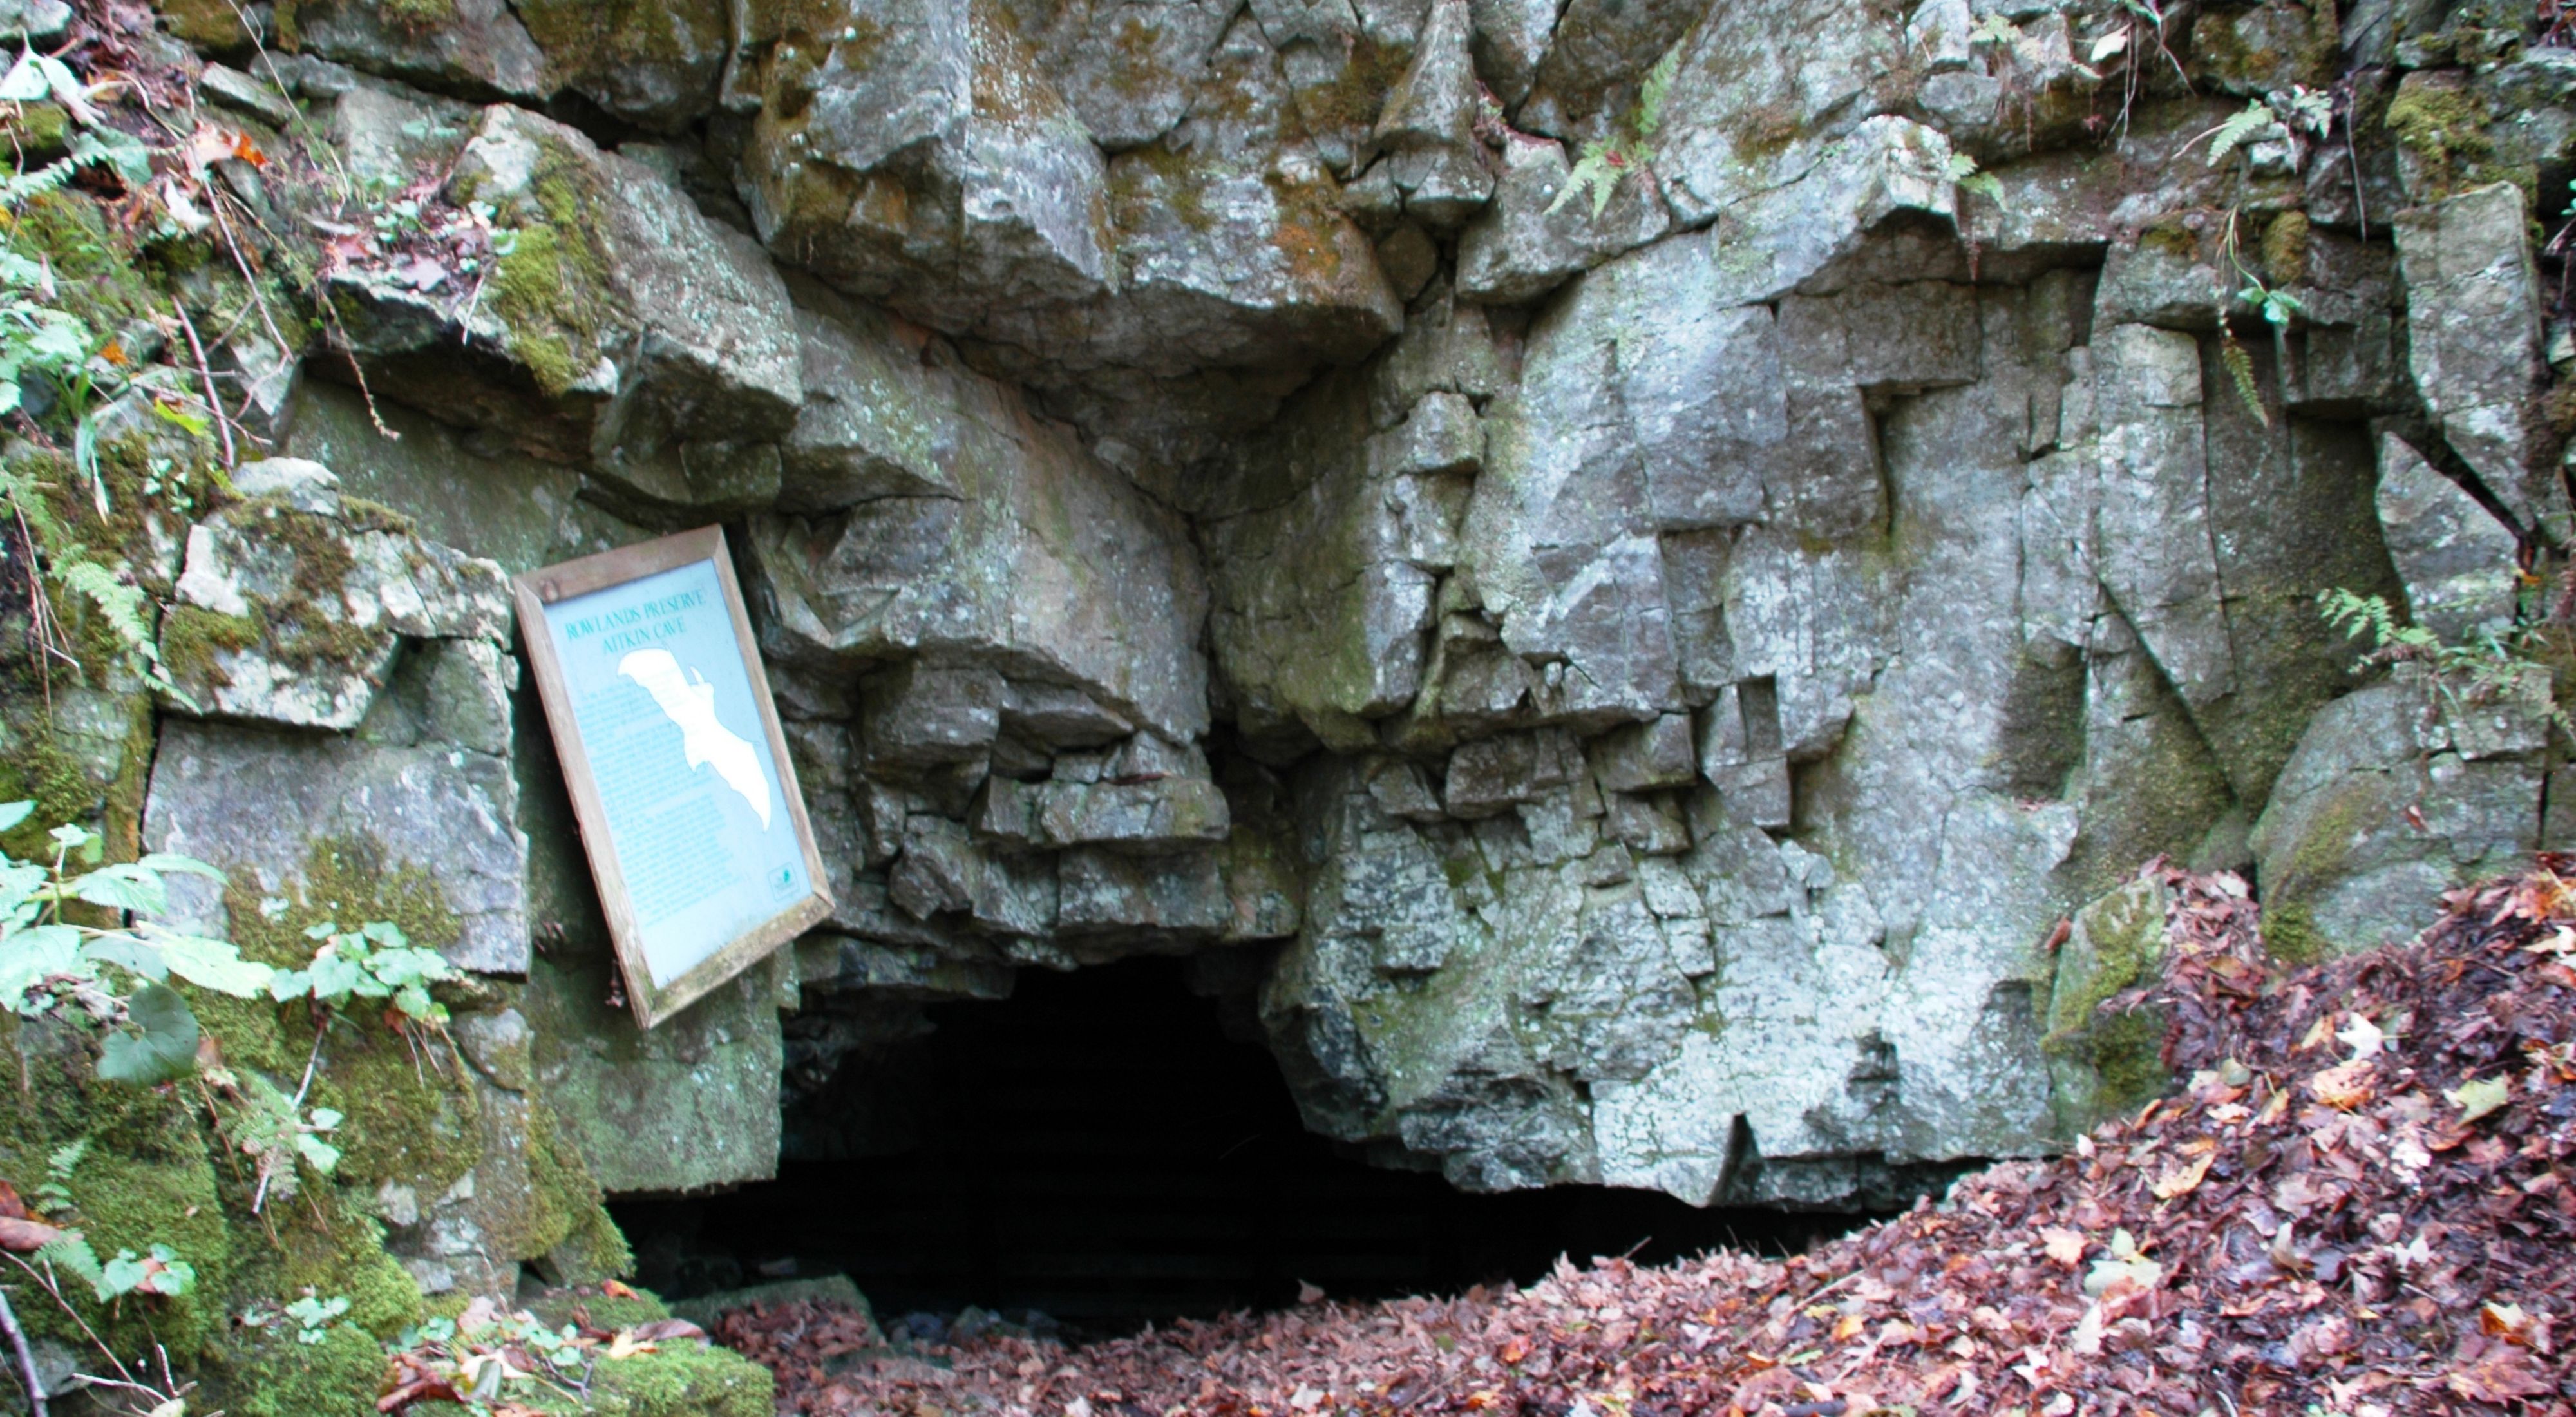 Heavy gray stone looms over the squared off entrance to a cave. A sign next to the cave entrance provides information about the bats who make a home inside.